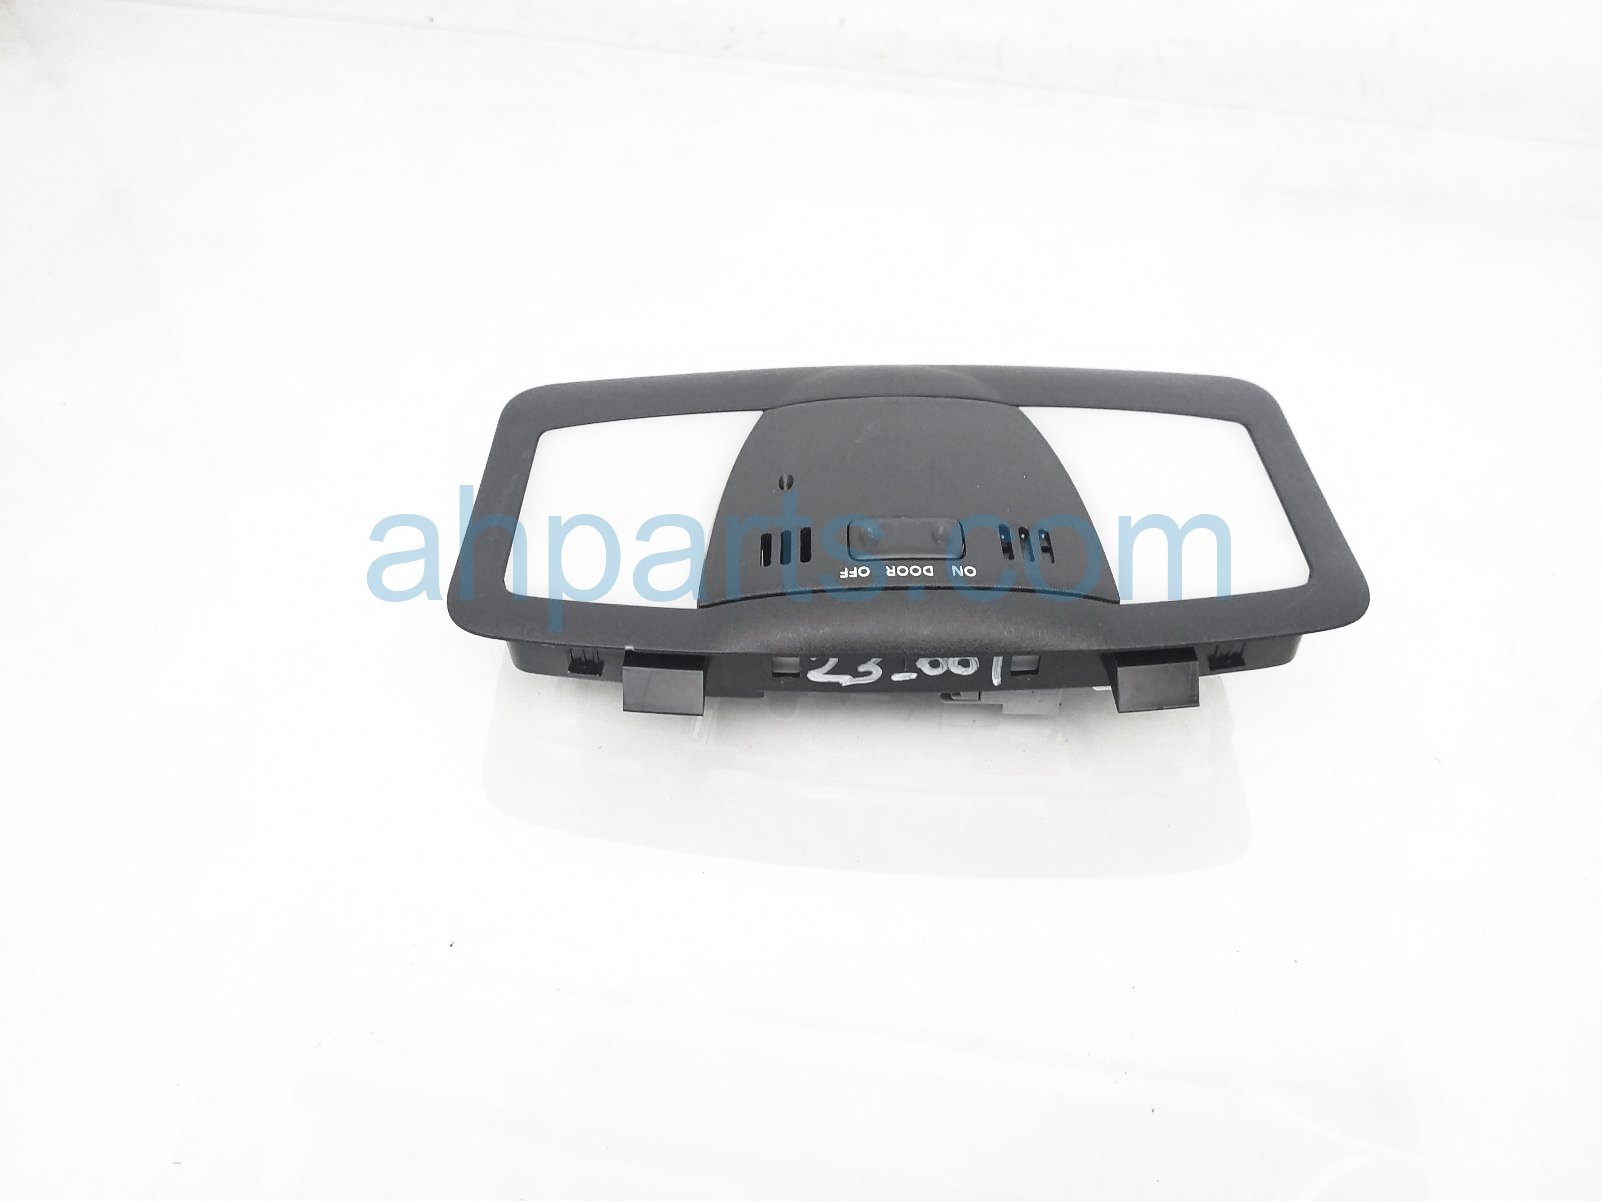 $30 Nissan MAP LIGHT / ROOF CONSOLE - BLACK